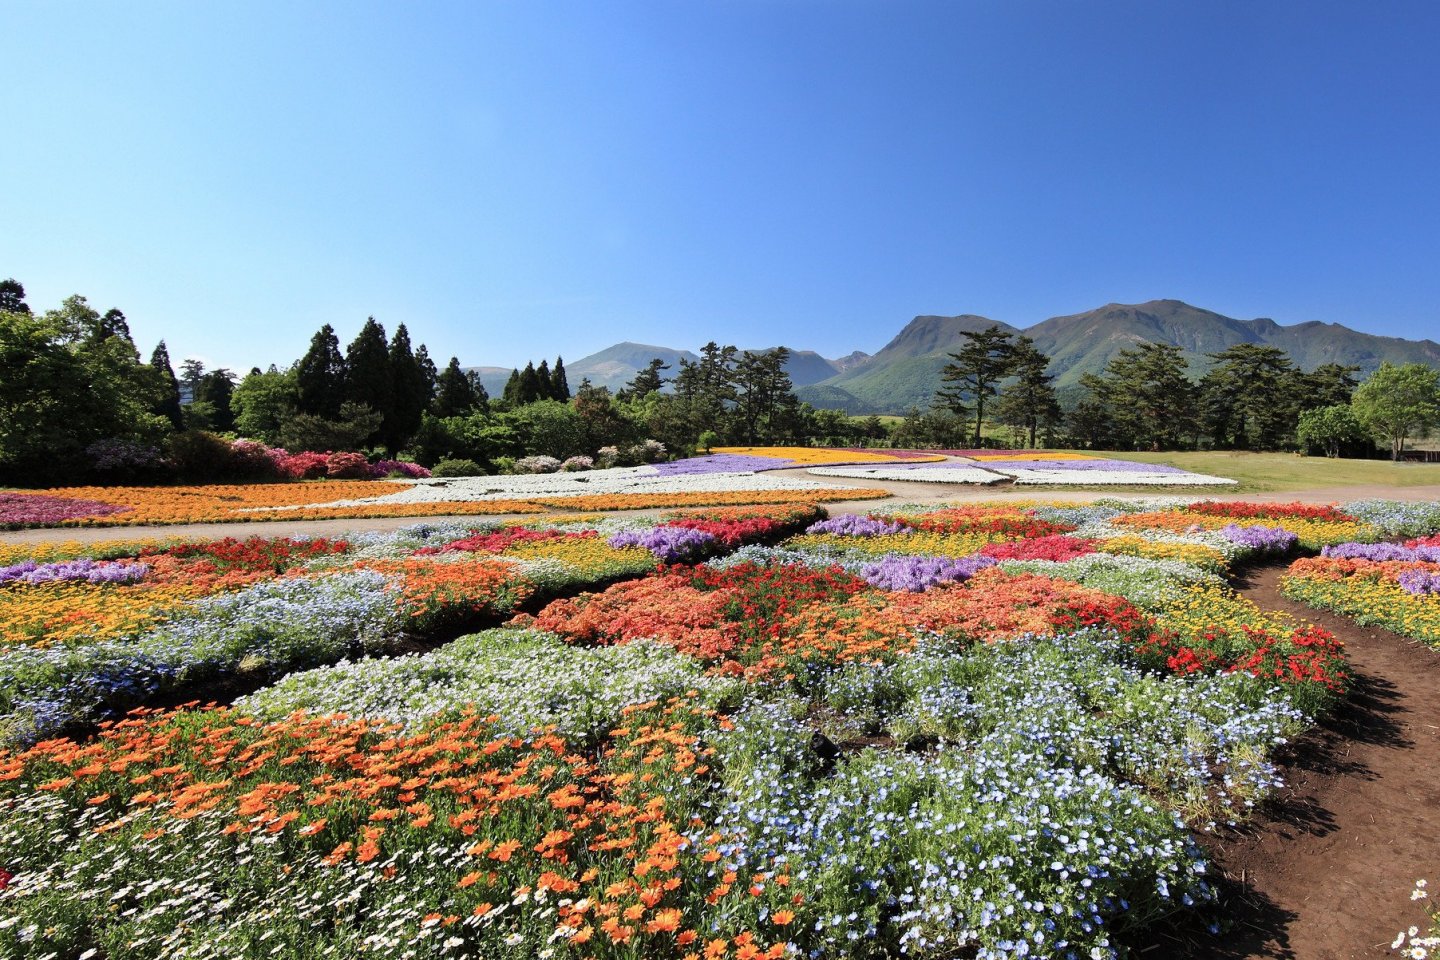 Kuju Flower Park is filled with colorful blooms